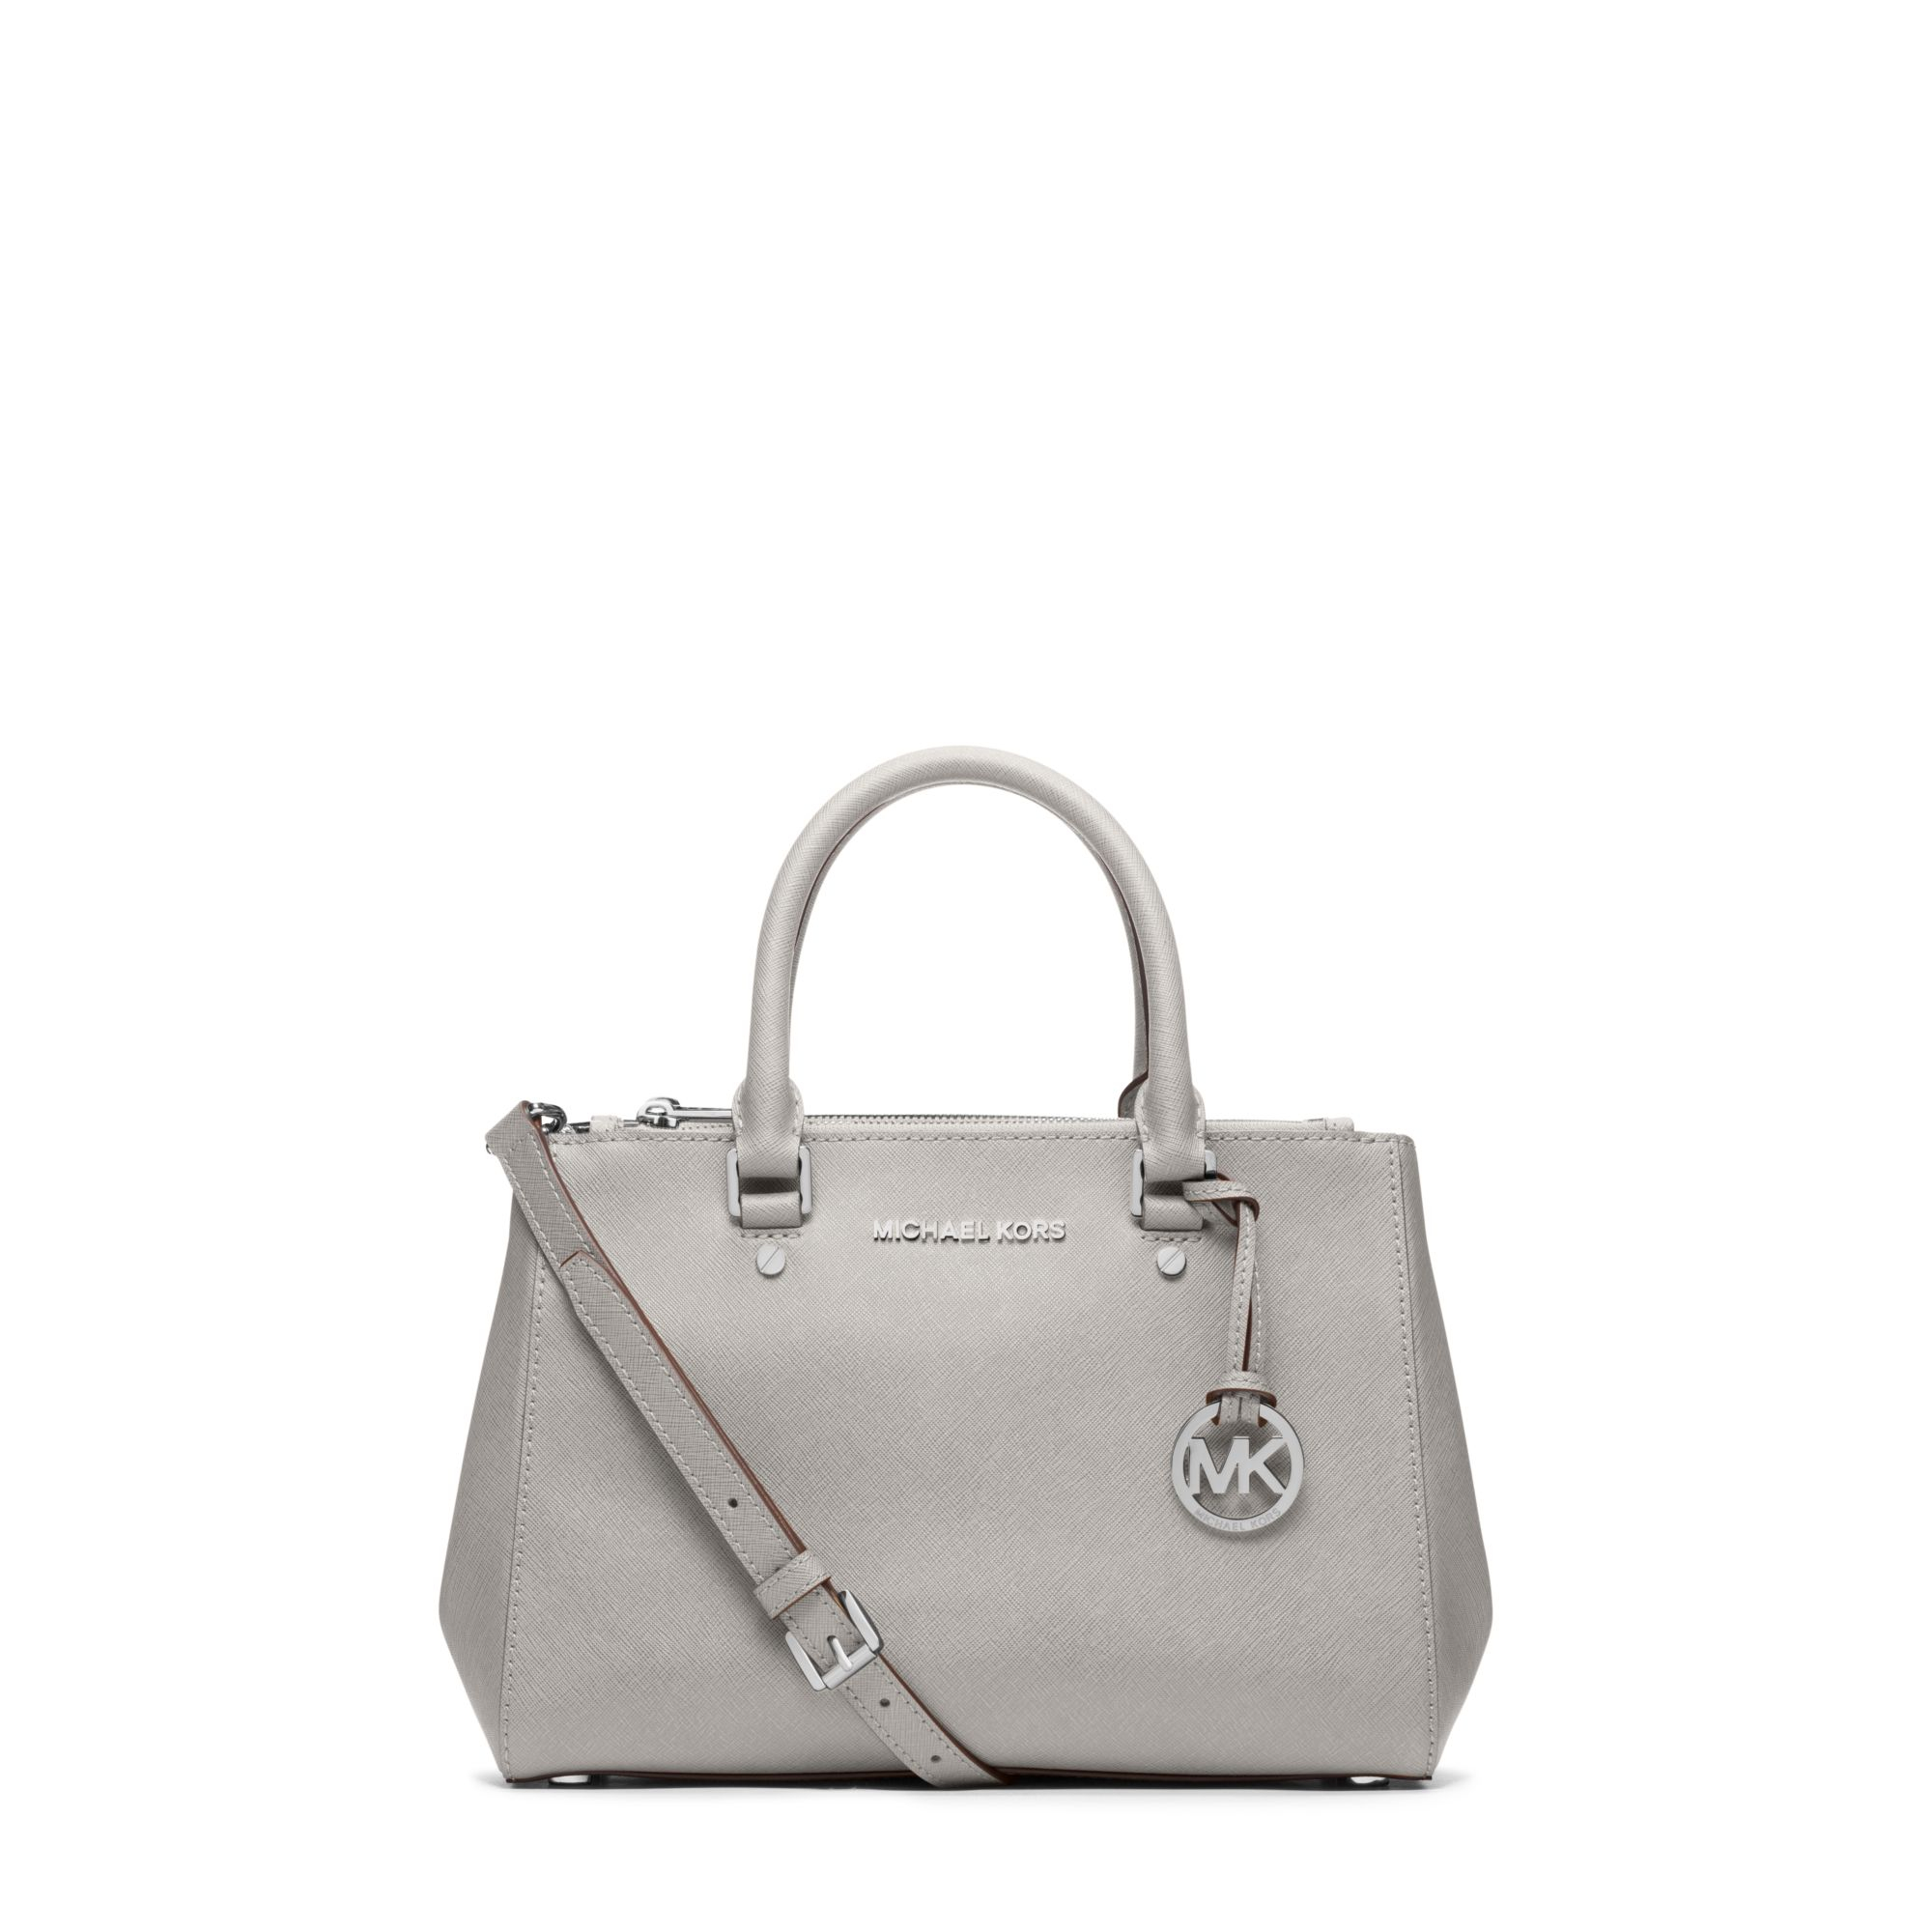 Lyst - Michael Kors Sutton Small Saffiano Leather Satchel in White